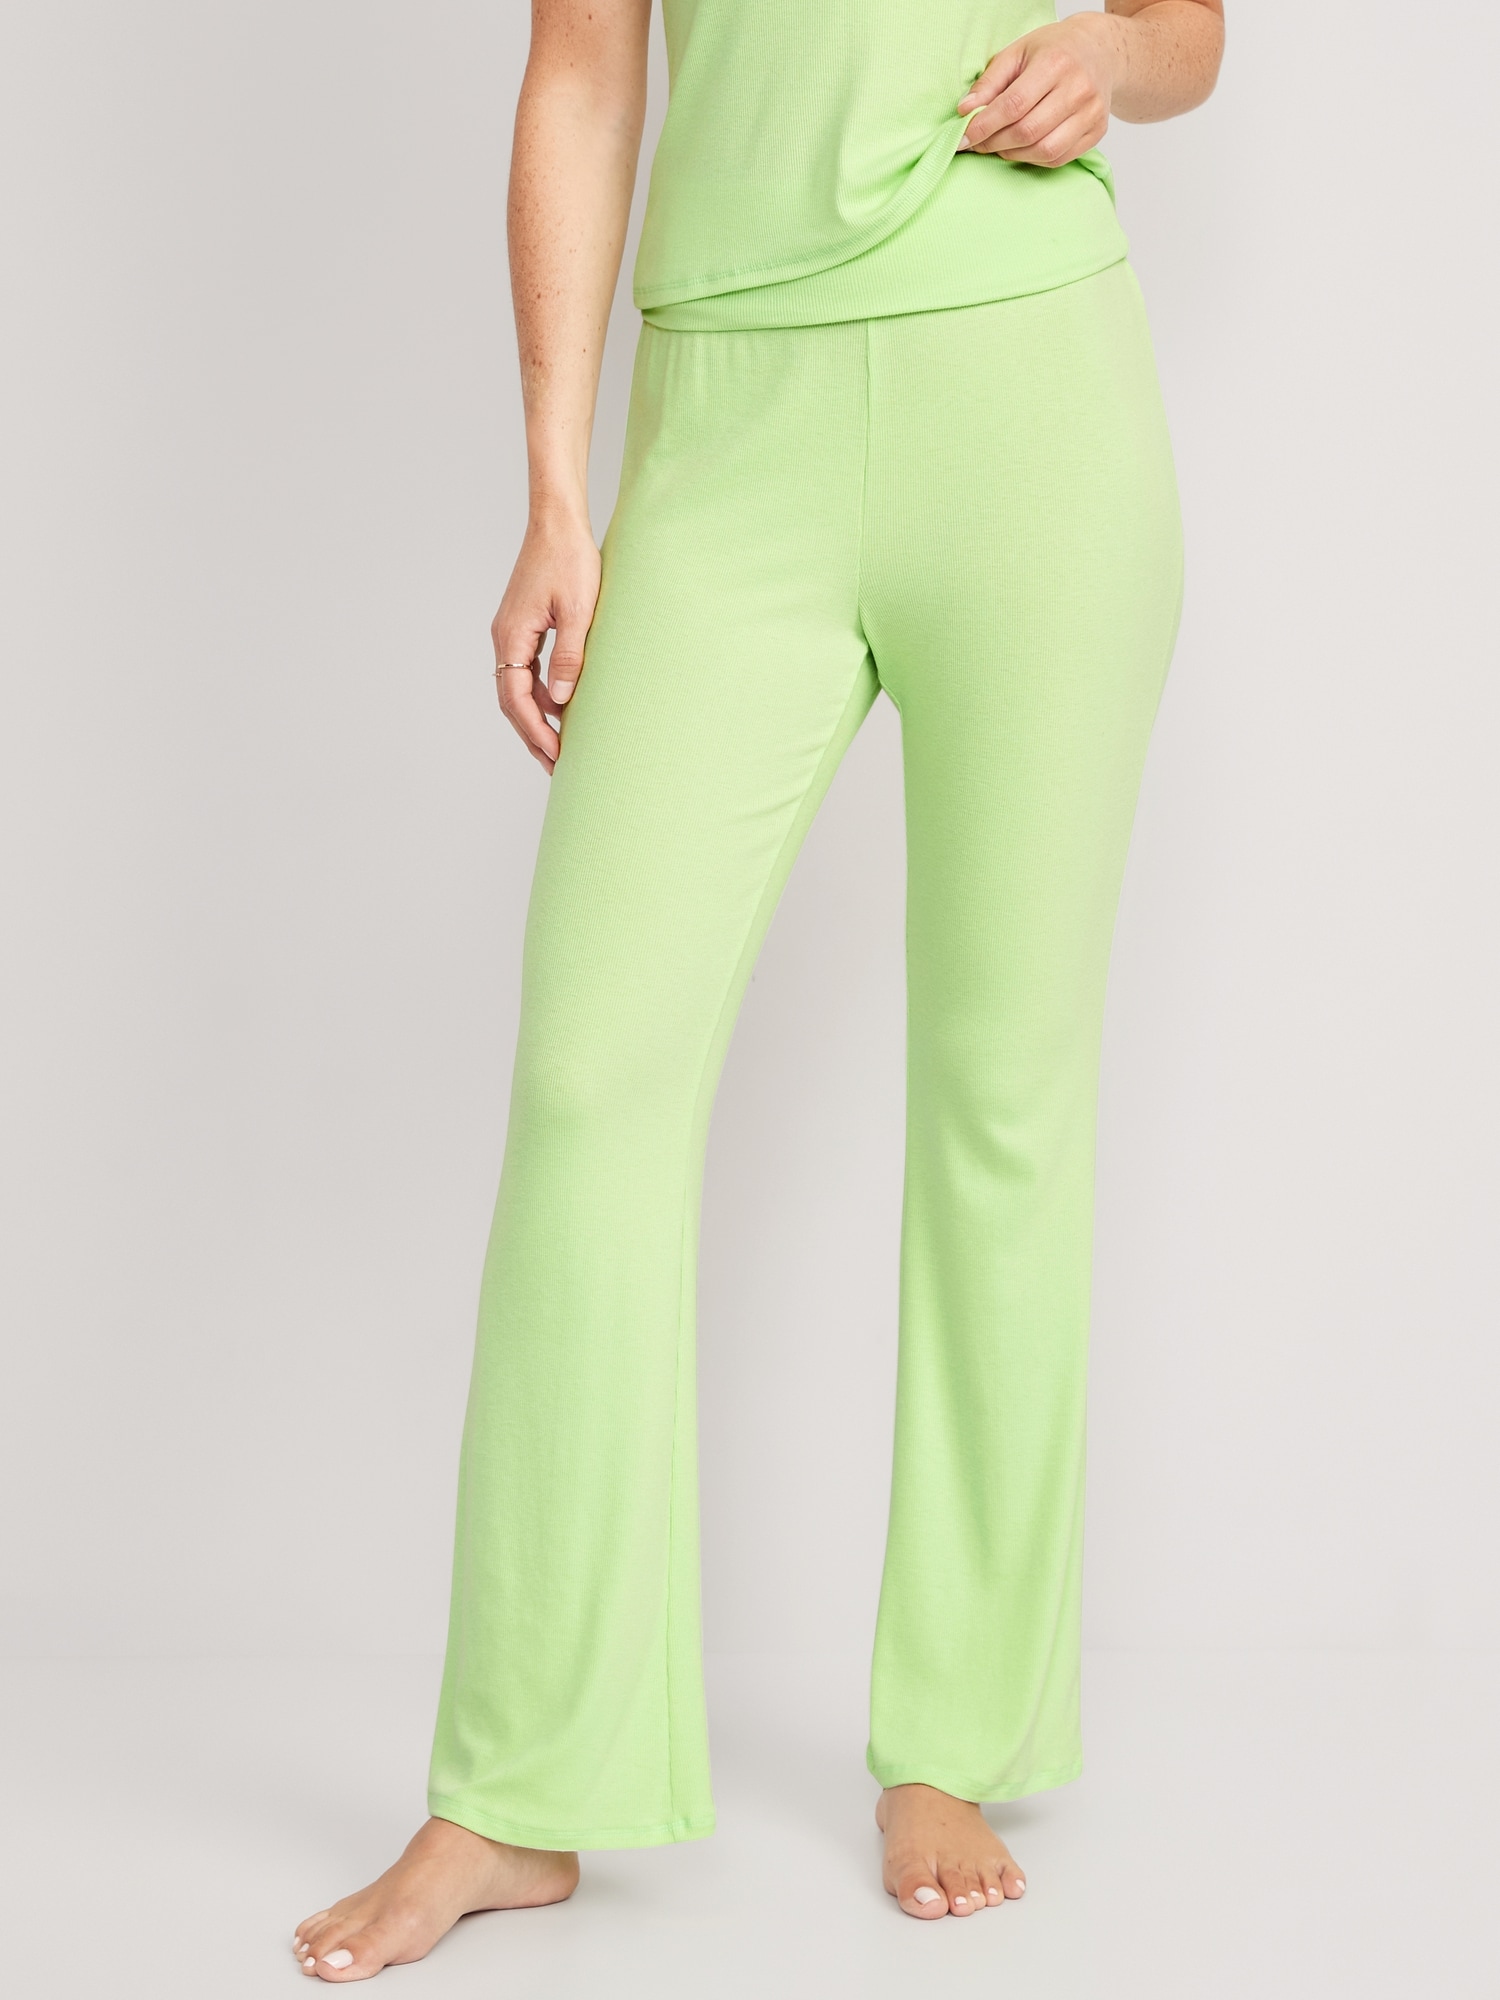 Pants Lounge By All In Motion Size: L